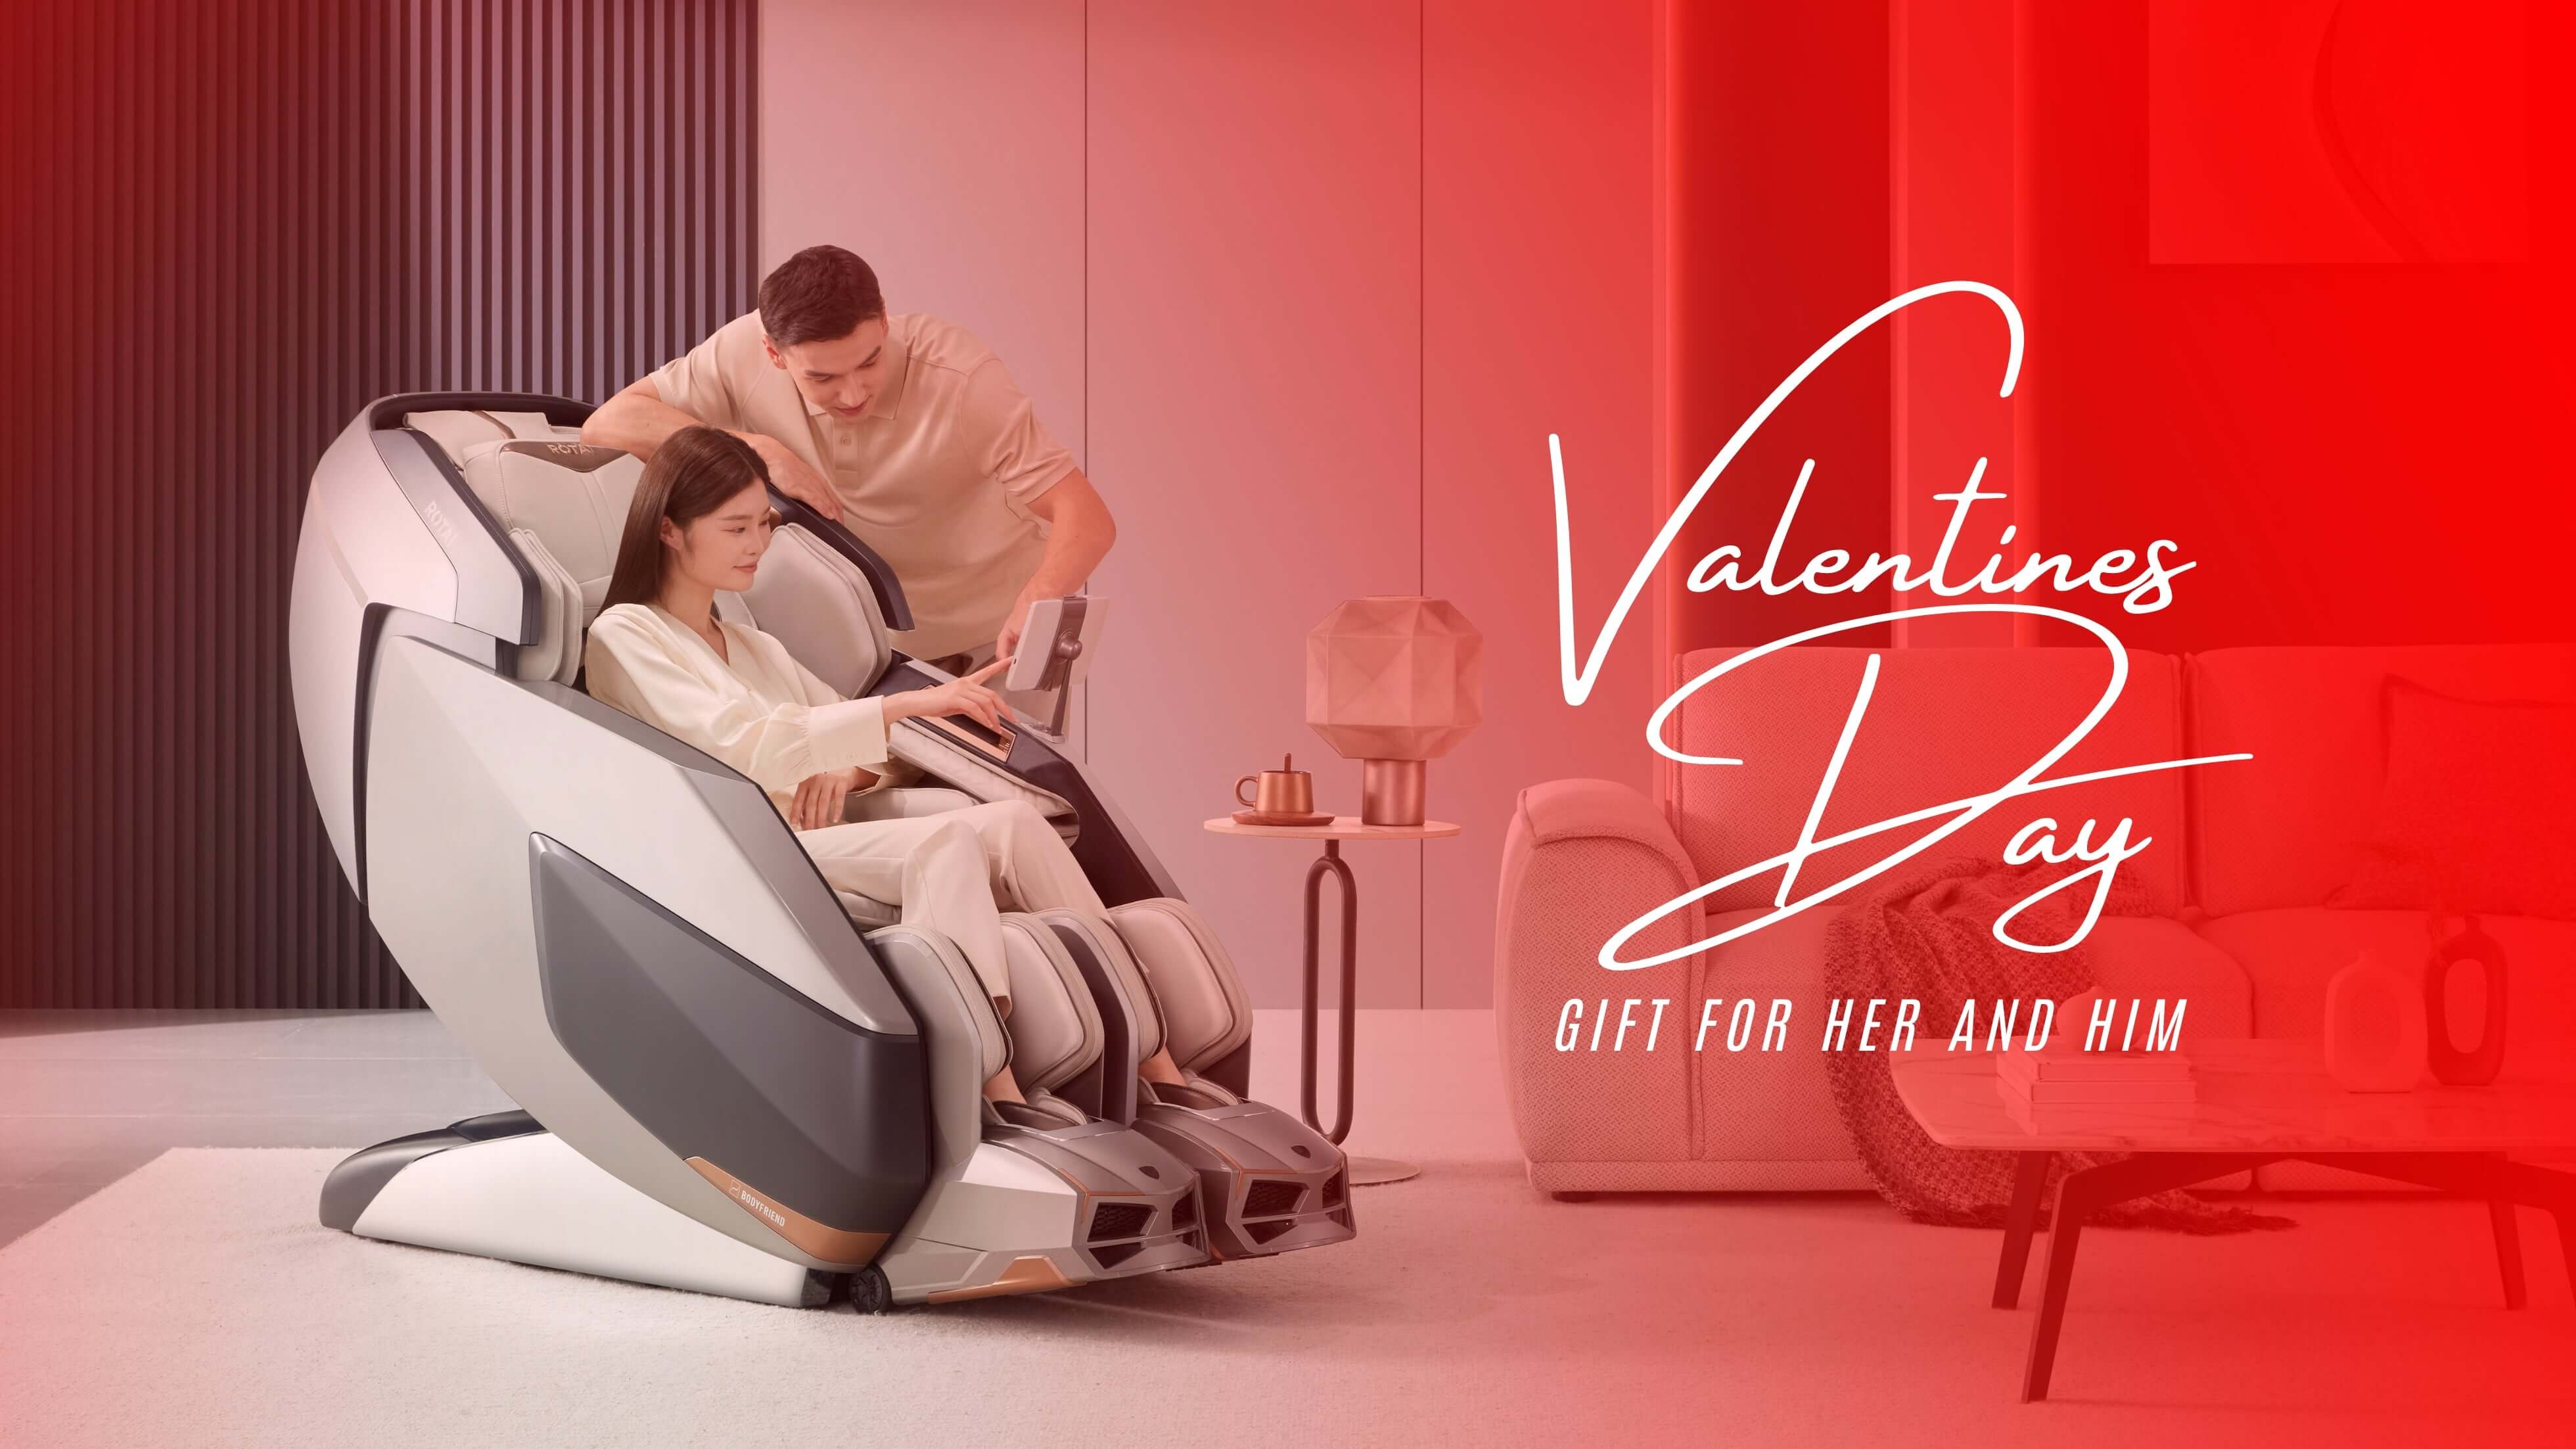 Top 5 Valentine's Day Gift Ideas for Her and Him, best massage chair uae, massage chair Dubai, massage chair uae, massage chair Saudi Arabia, كرسي التدليك, Best massage chair in Dubai UAE, buy massage chair